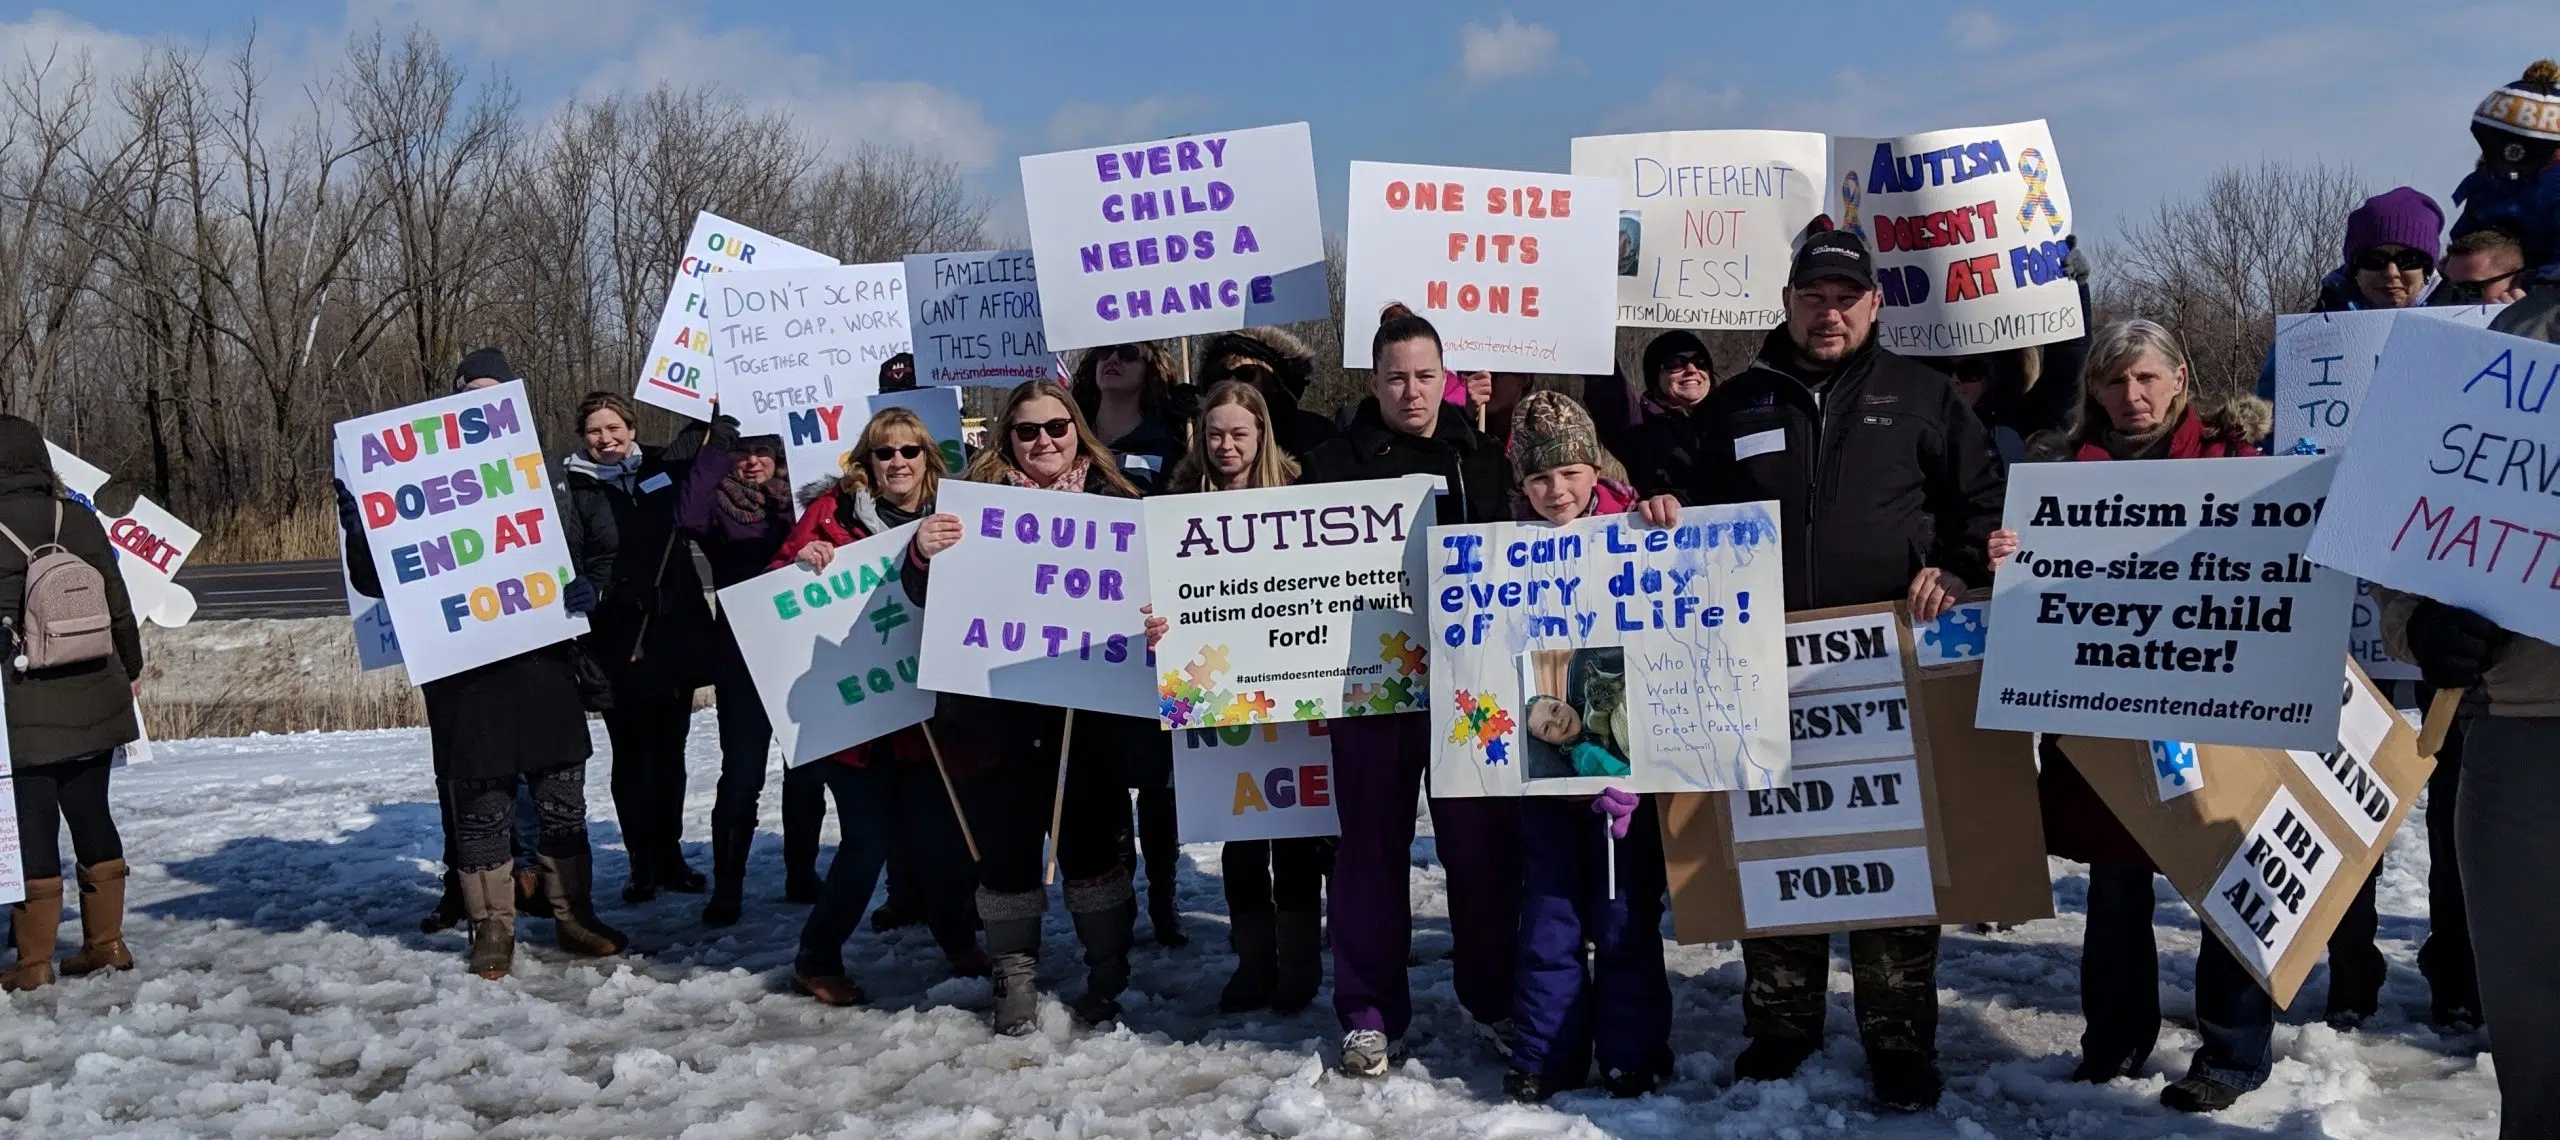 Parents and supporters rally against autism funding changes